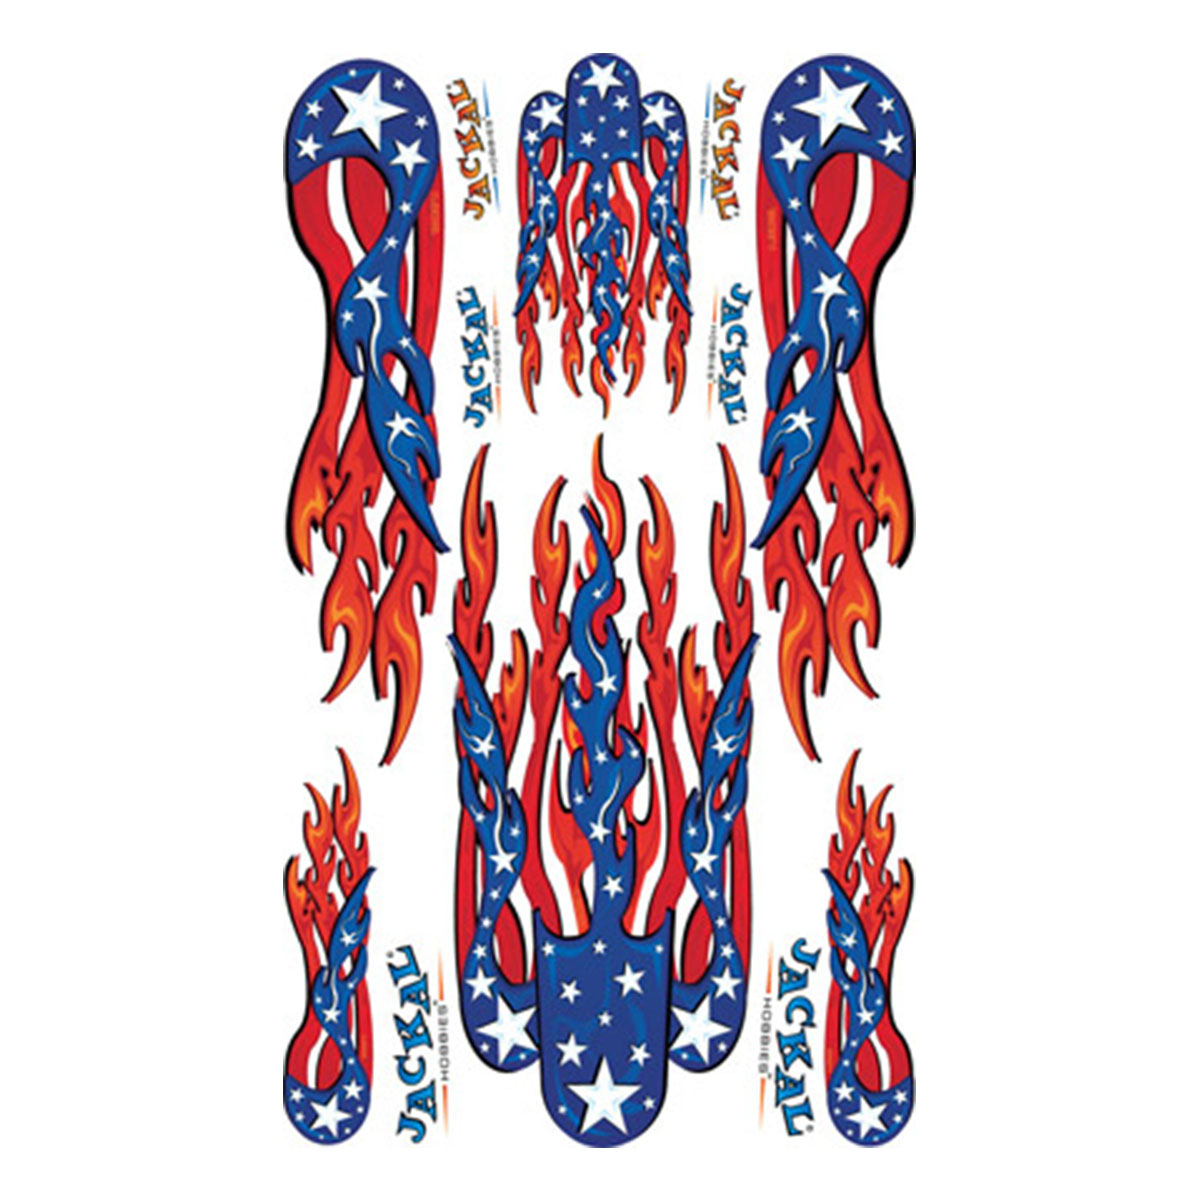 Pinewood Derby Skulls on Fire - Red Decal